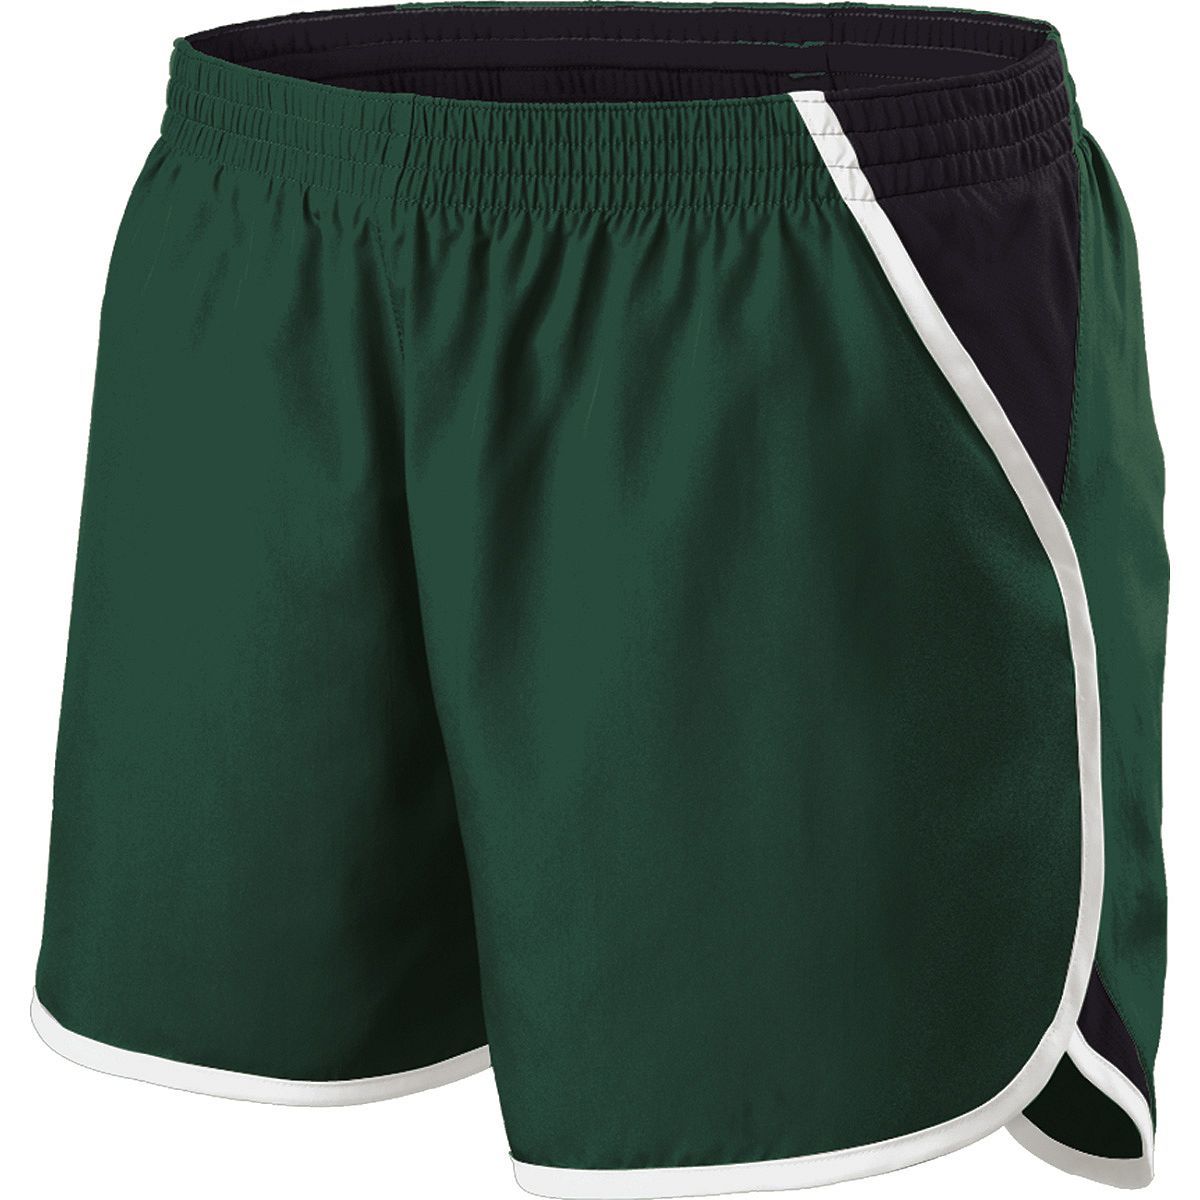 Holloway Energize Shorts in Forest/Black/White  -Part of the Ladies, Ladies-Shorts, Holloway product lines at KanaleyCreations.com